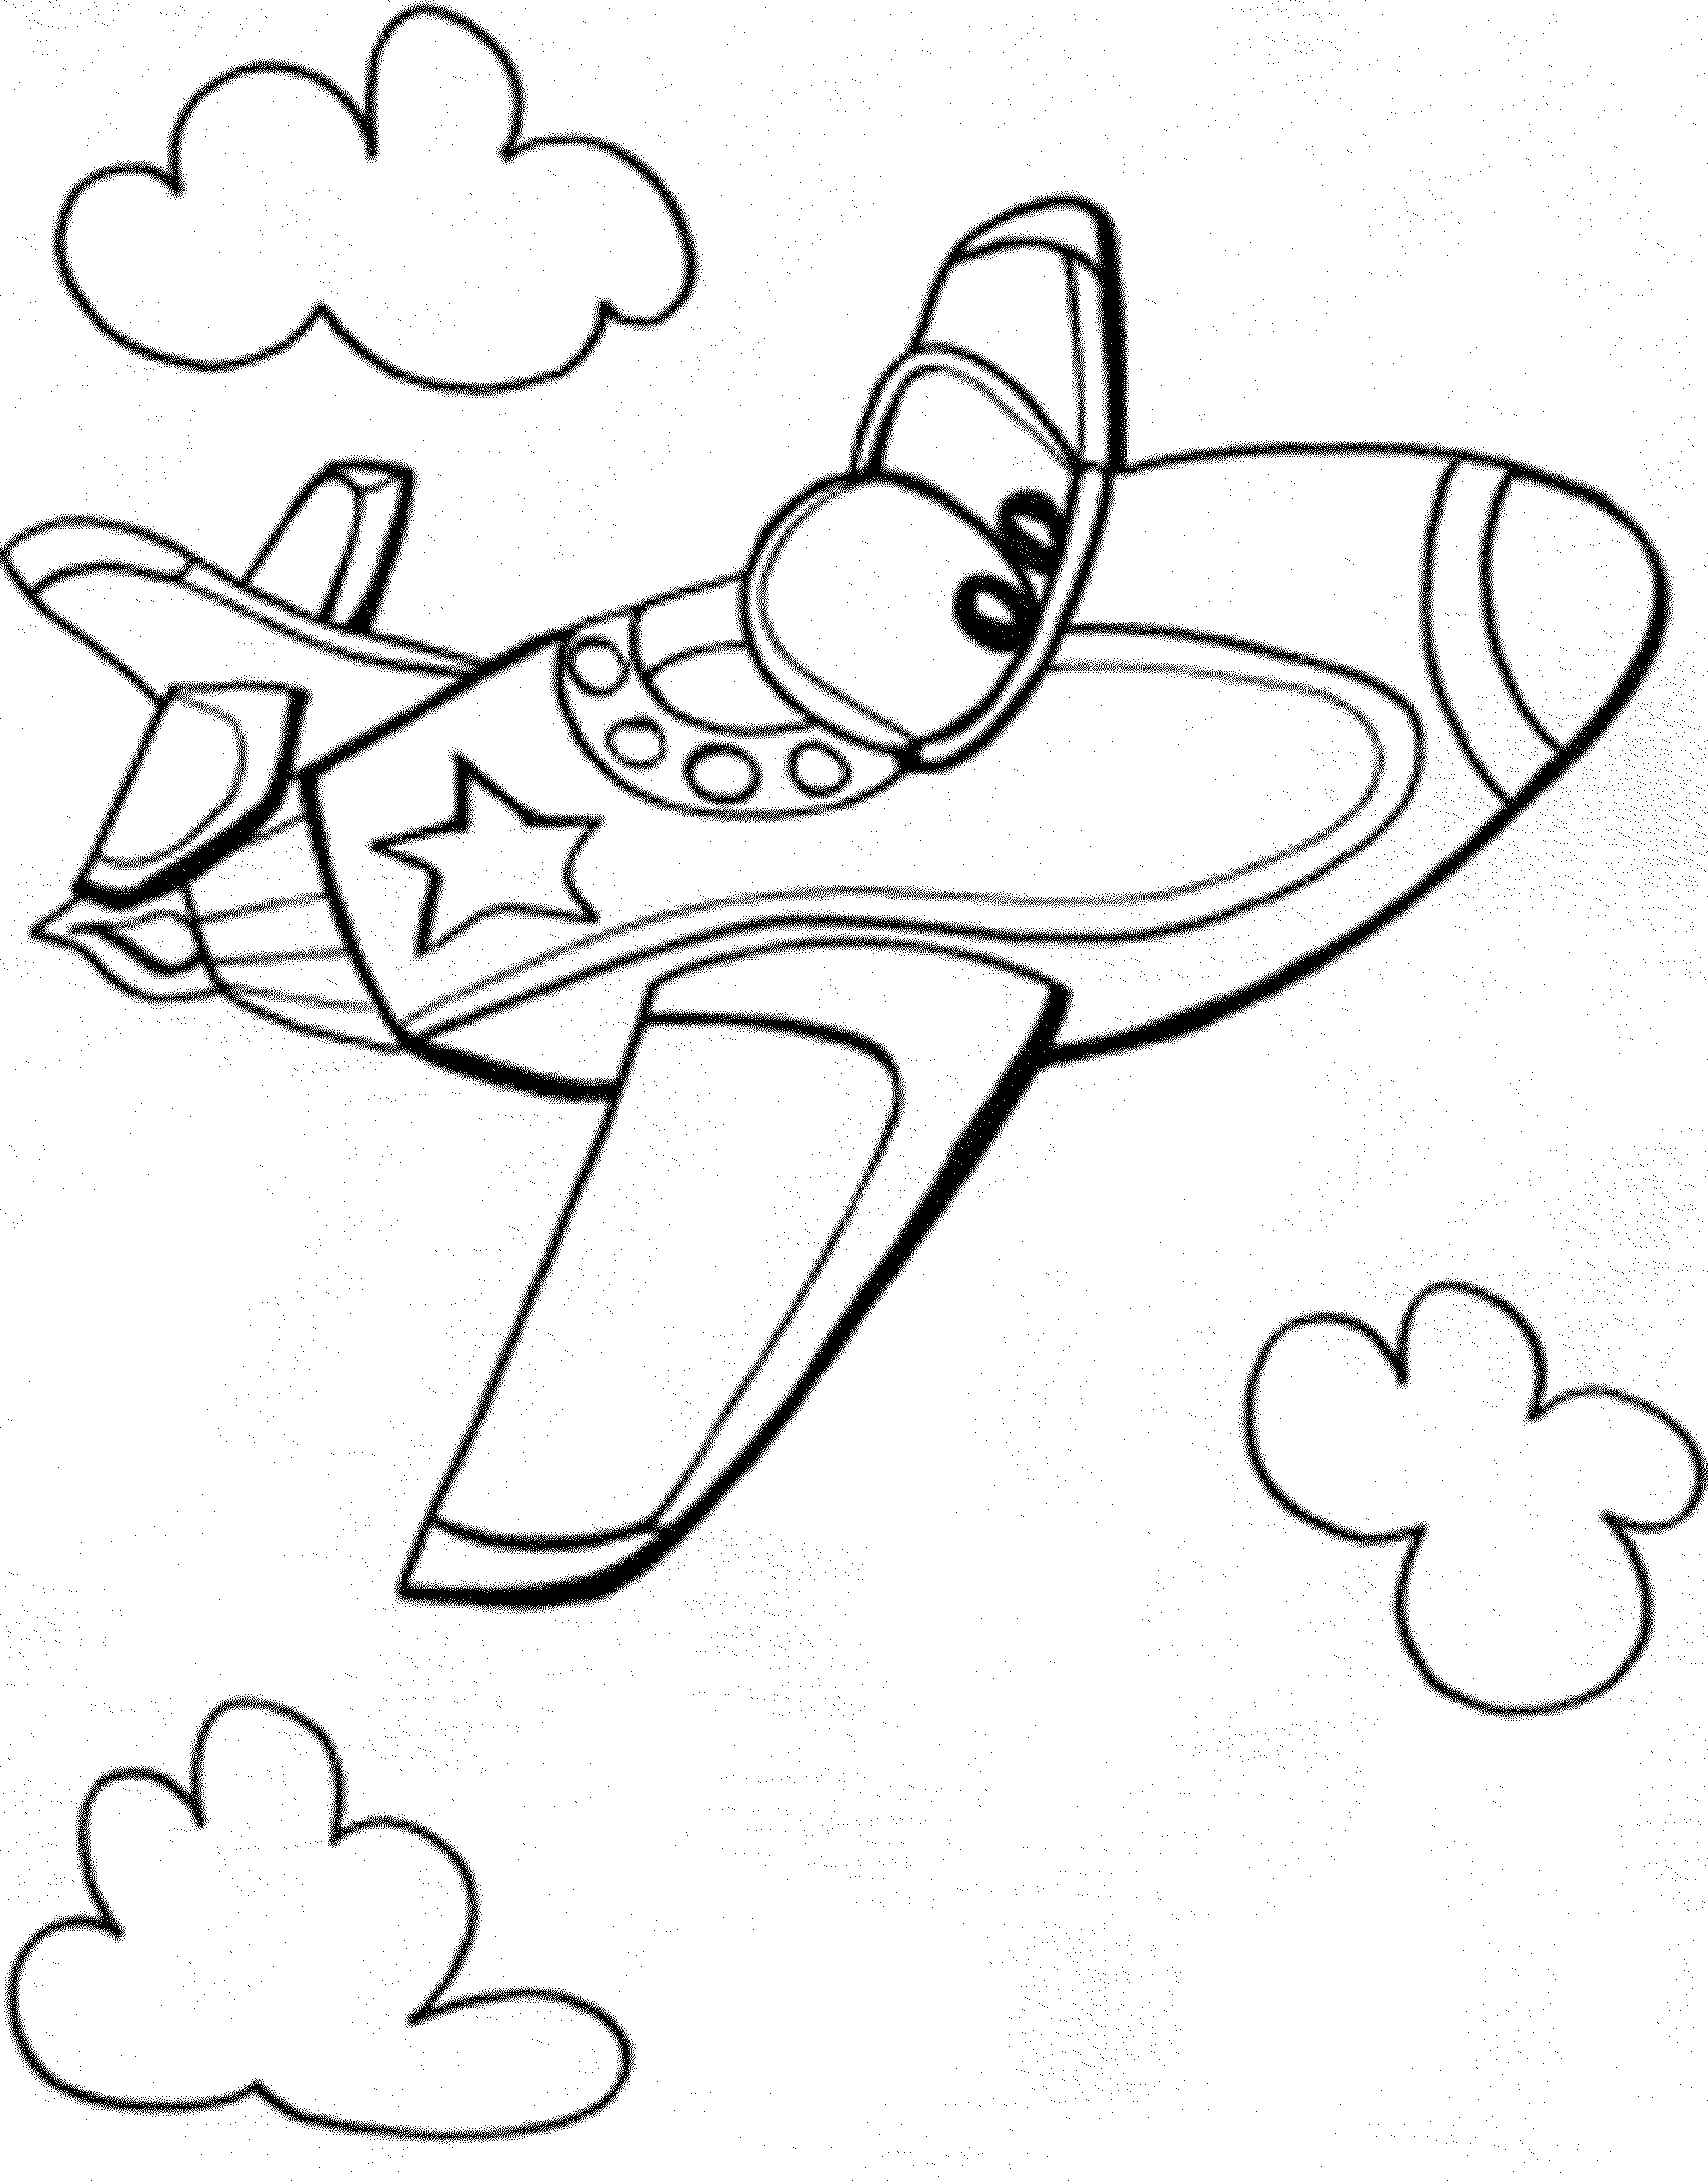 airplane coloring sheets coloring pages for kids airplane coloring pages airplane coloring sheets 